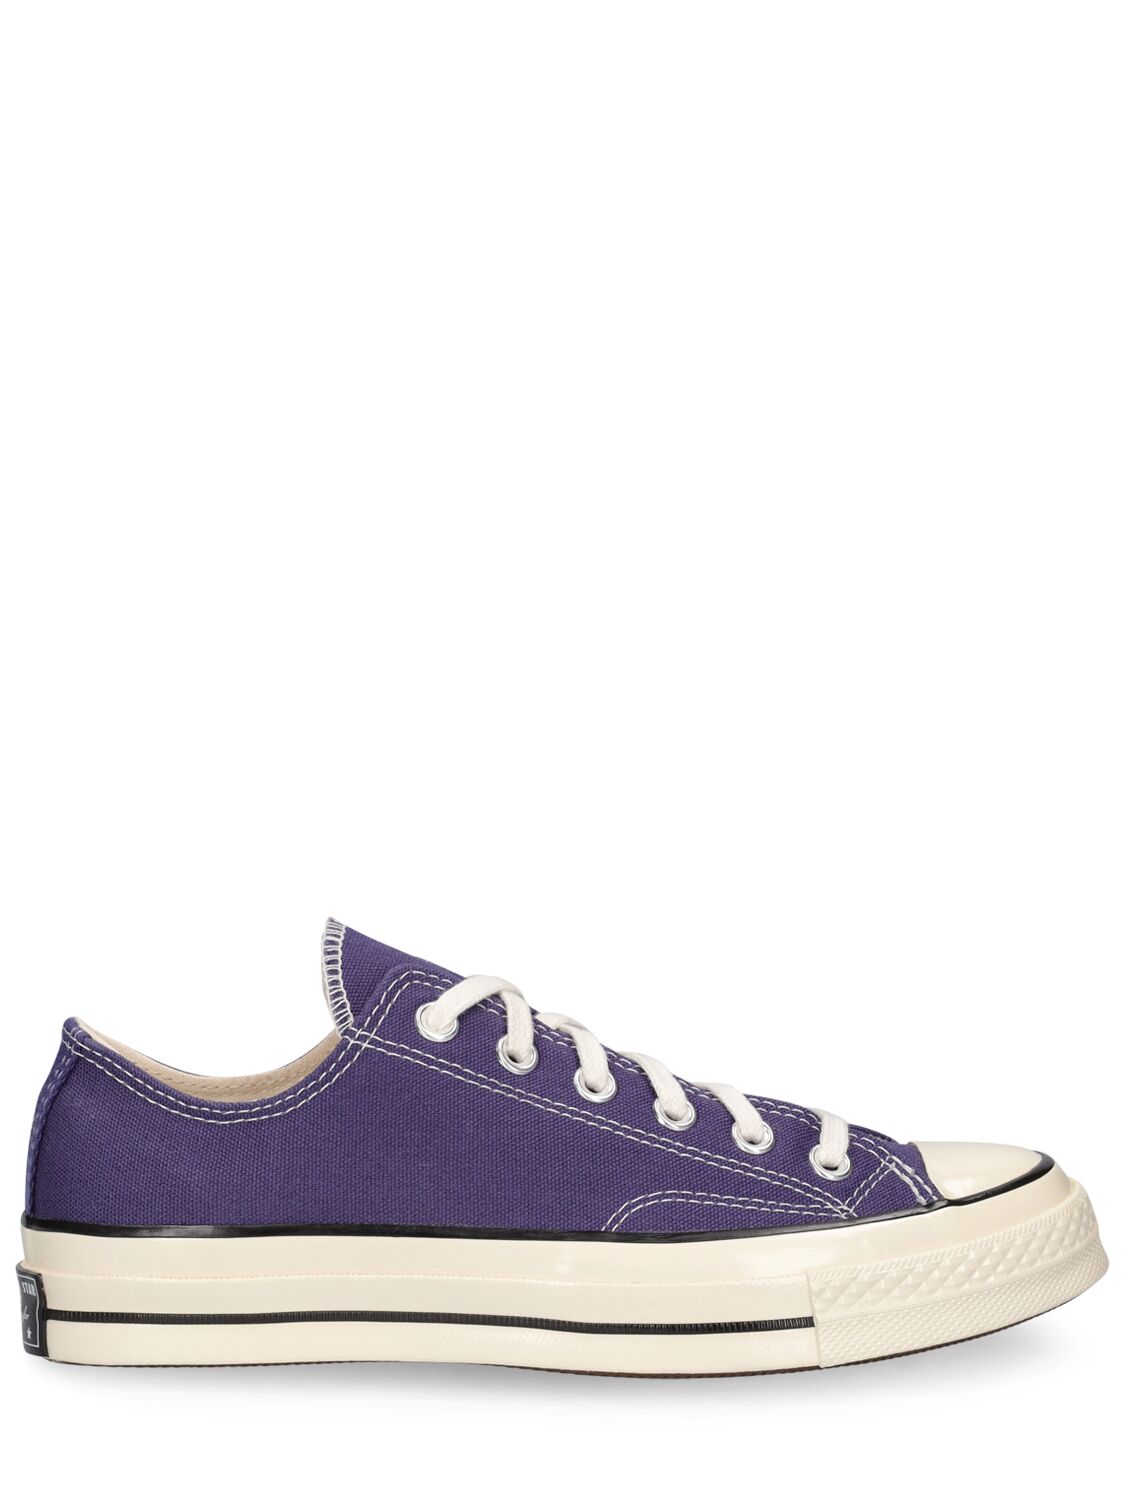 Image of Chuck 70 Sneakers